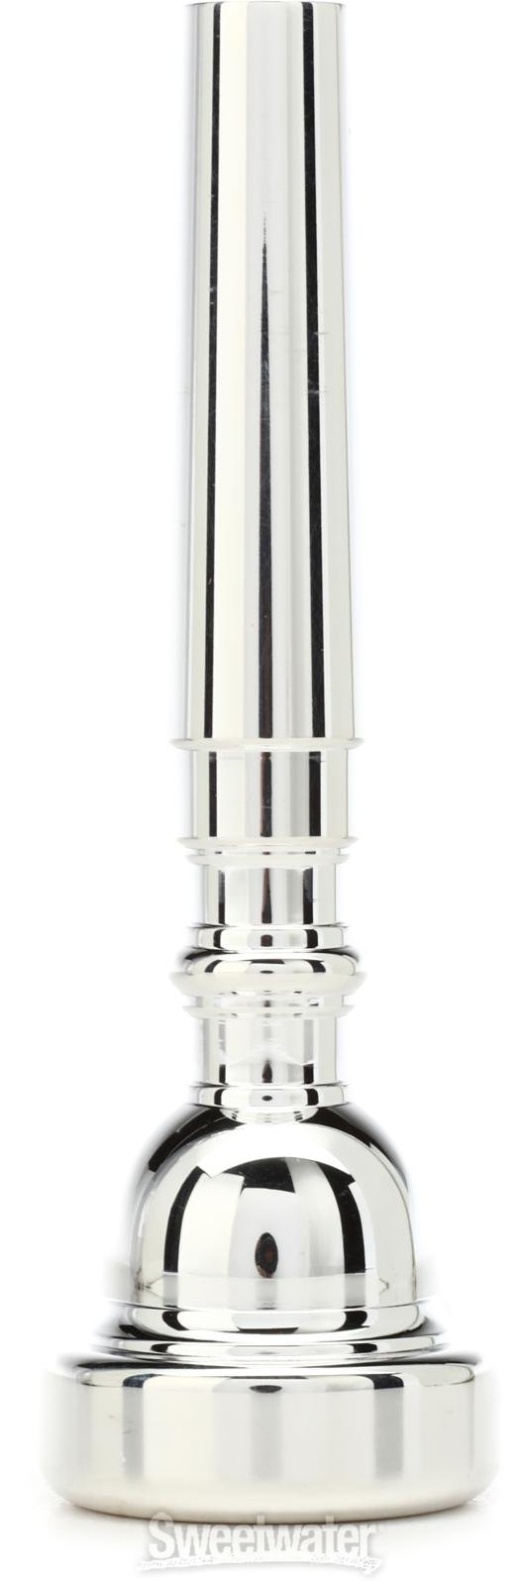 Bach 351 Classic Series Silver-Plated Trumpet Mouthpiece - 1-1/2c